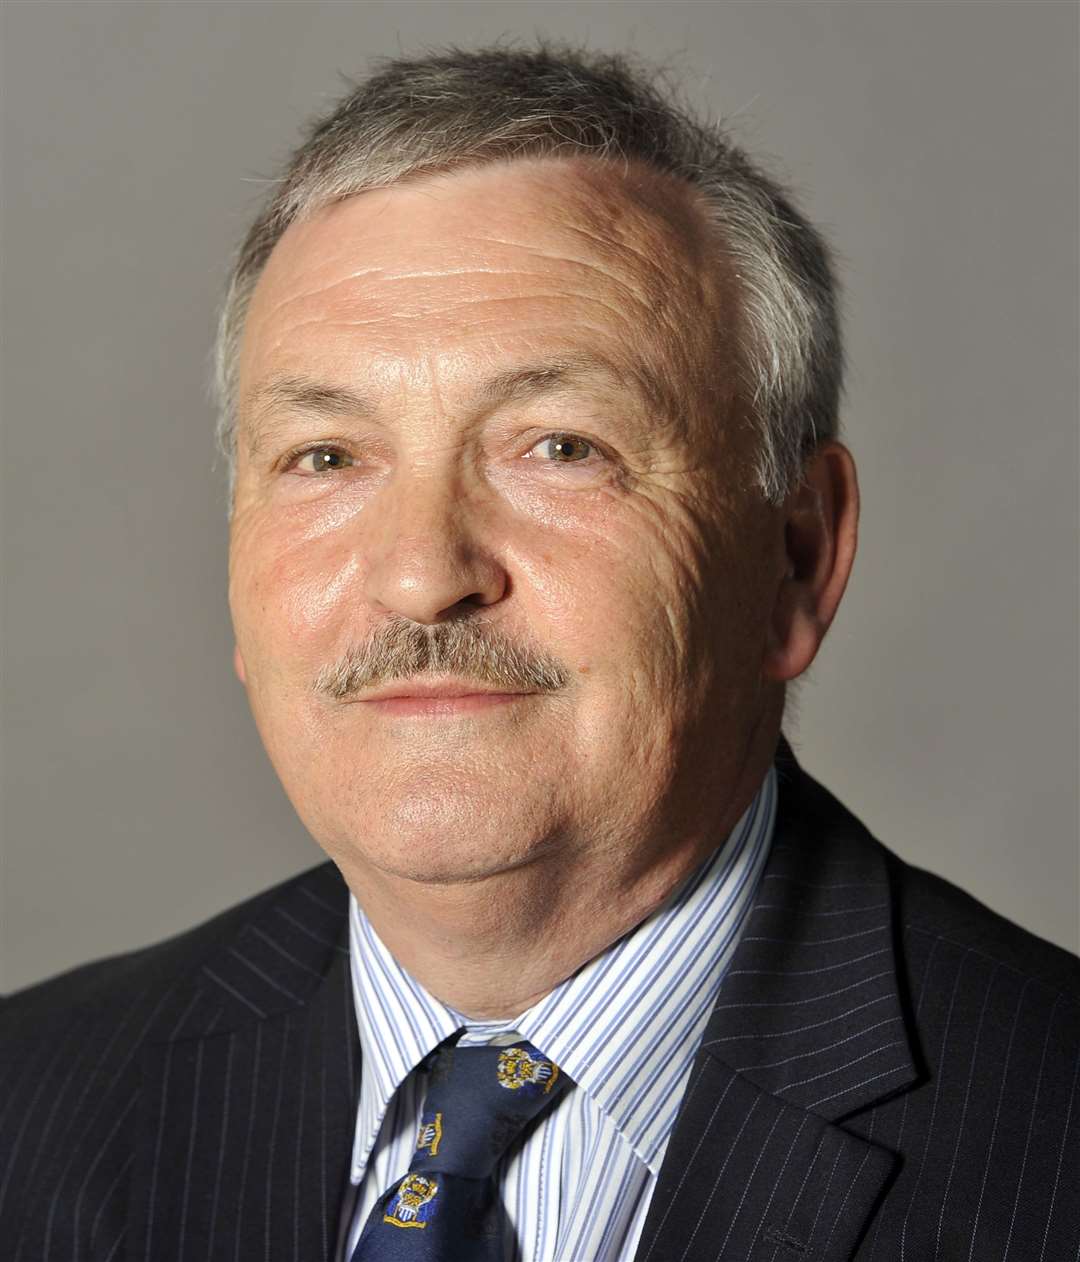 Medway Council leader Alan Jarrett posted a message of thanks virtually